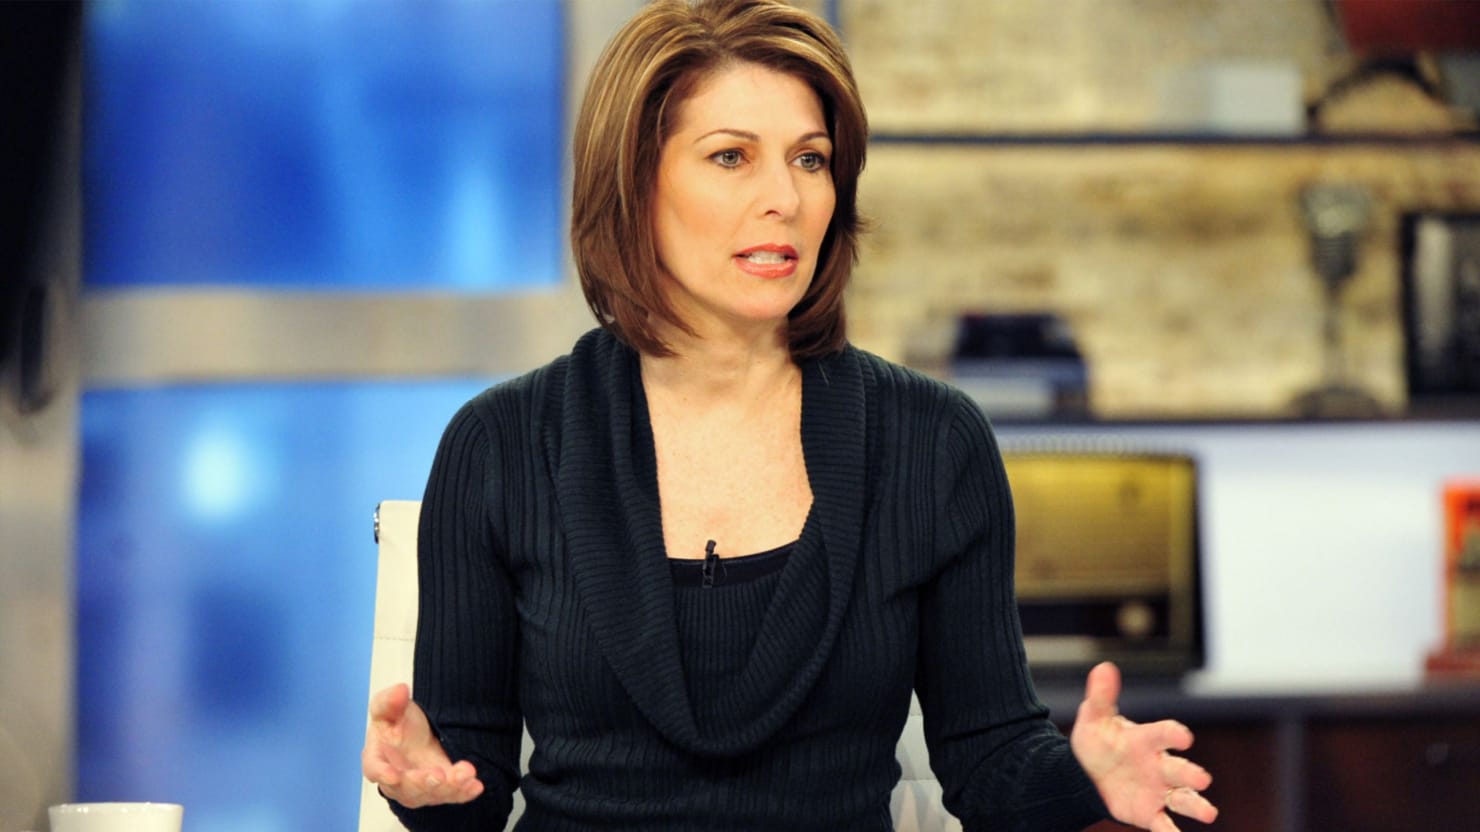 Ex-CBS Reporter Sharyl Attkisson’s Battle Royale With the Feds.